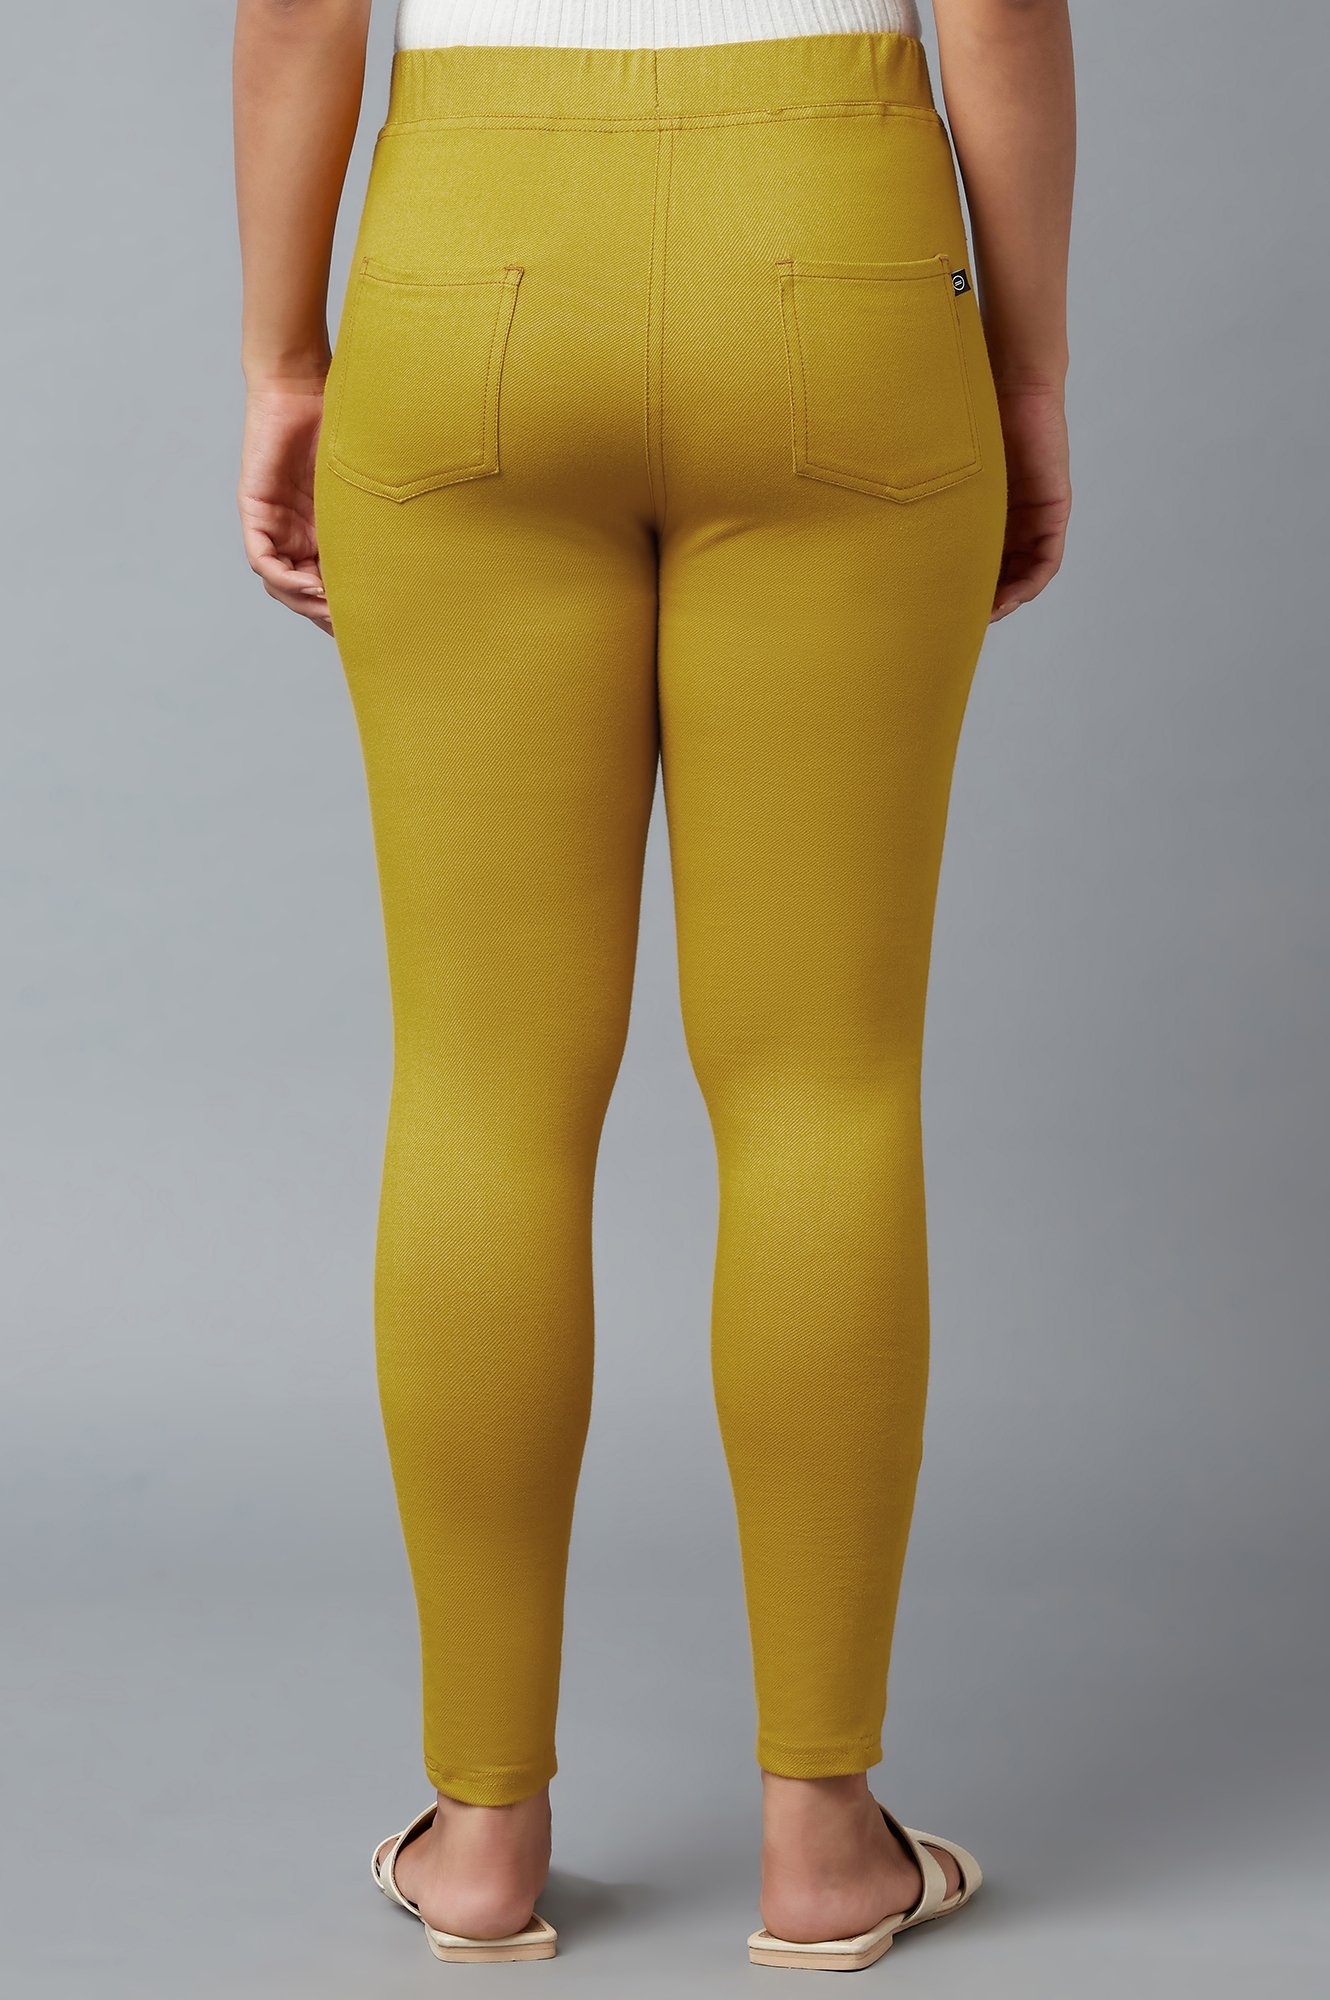 Elleven | Yellow Yarn-Dyed Knitted Jeggings 1